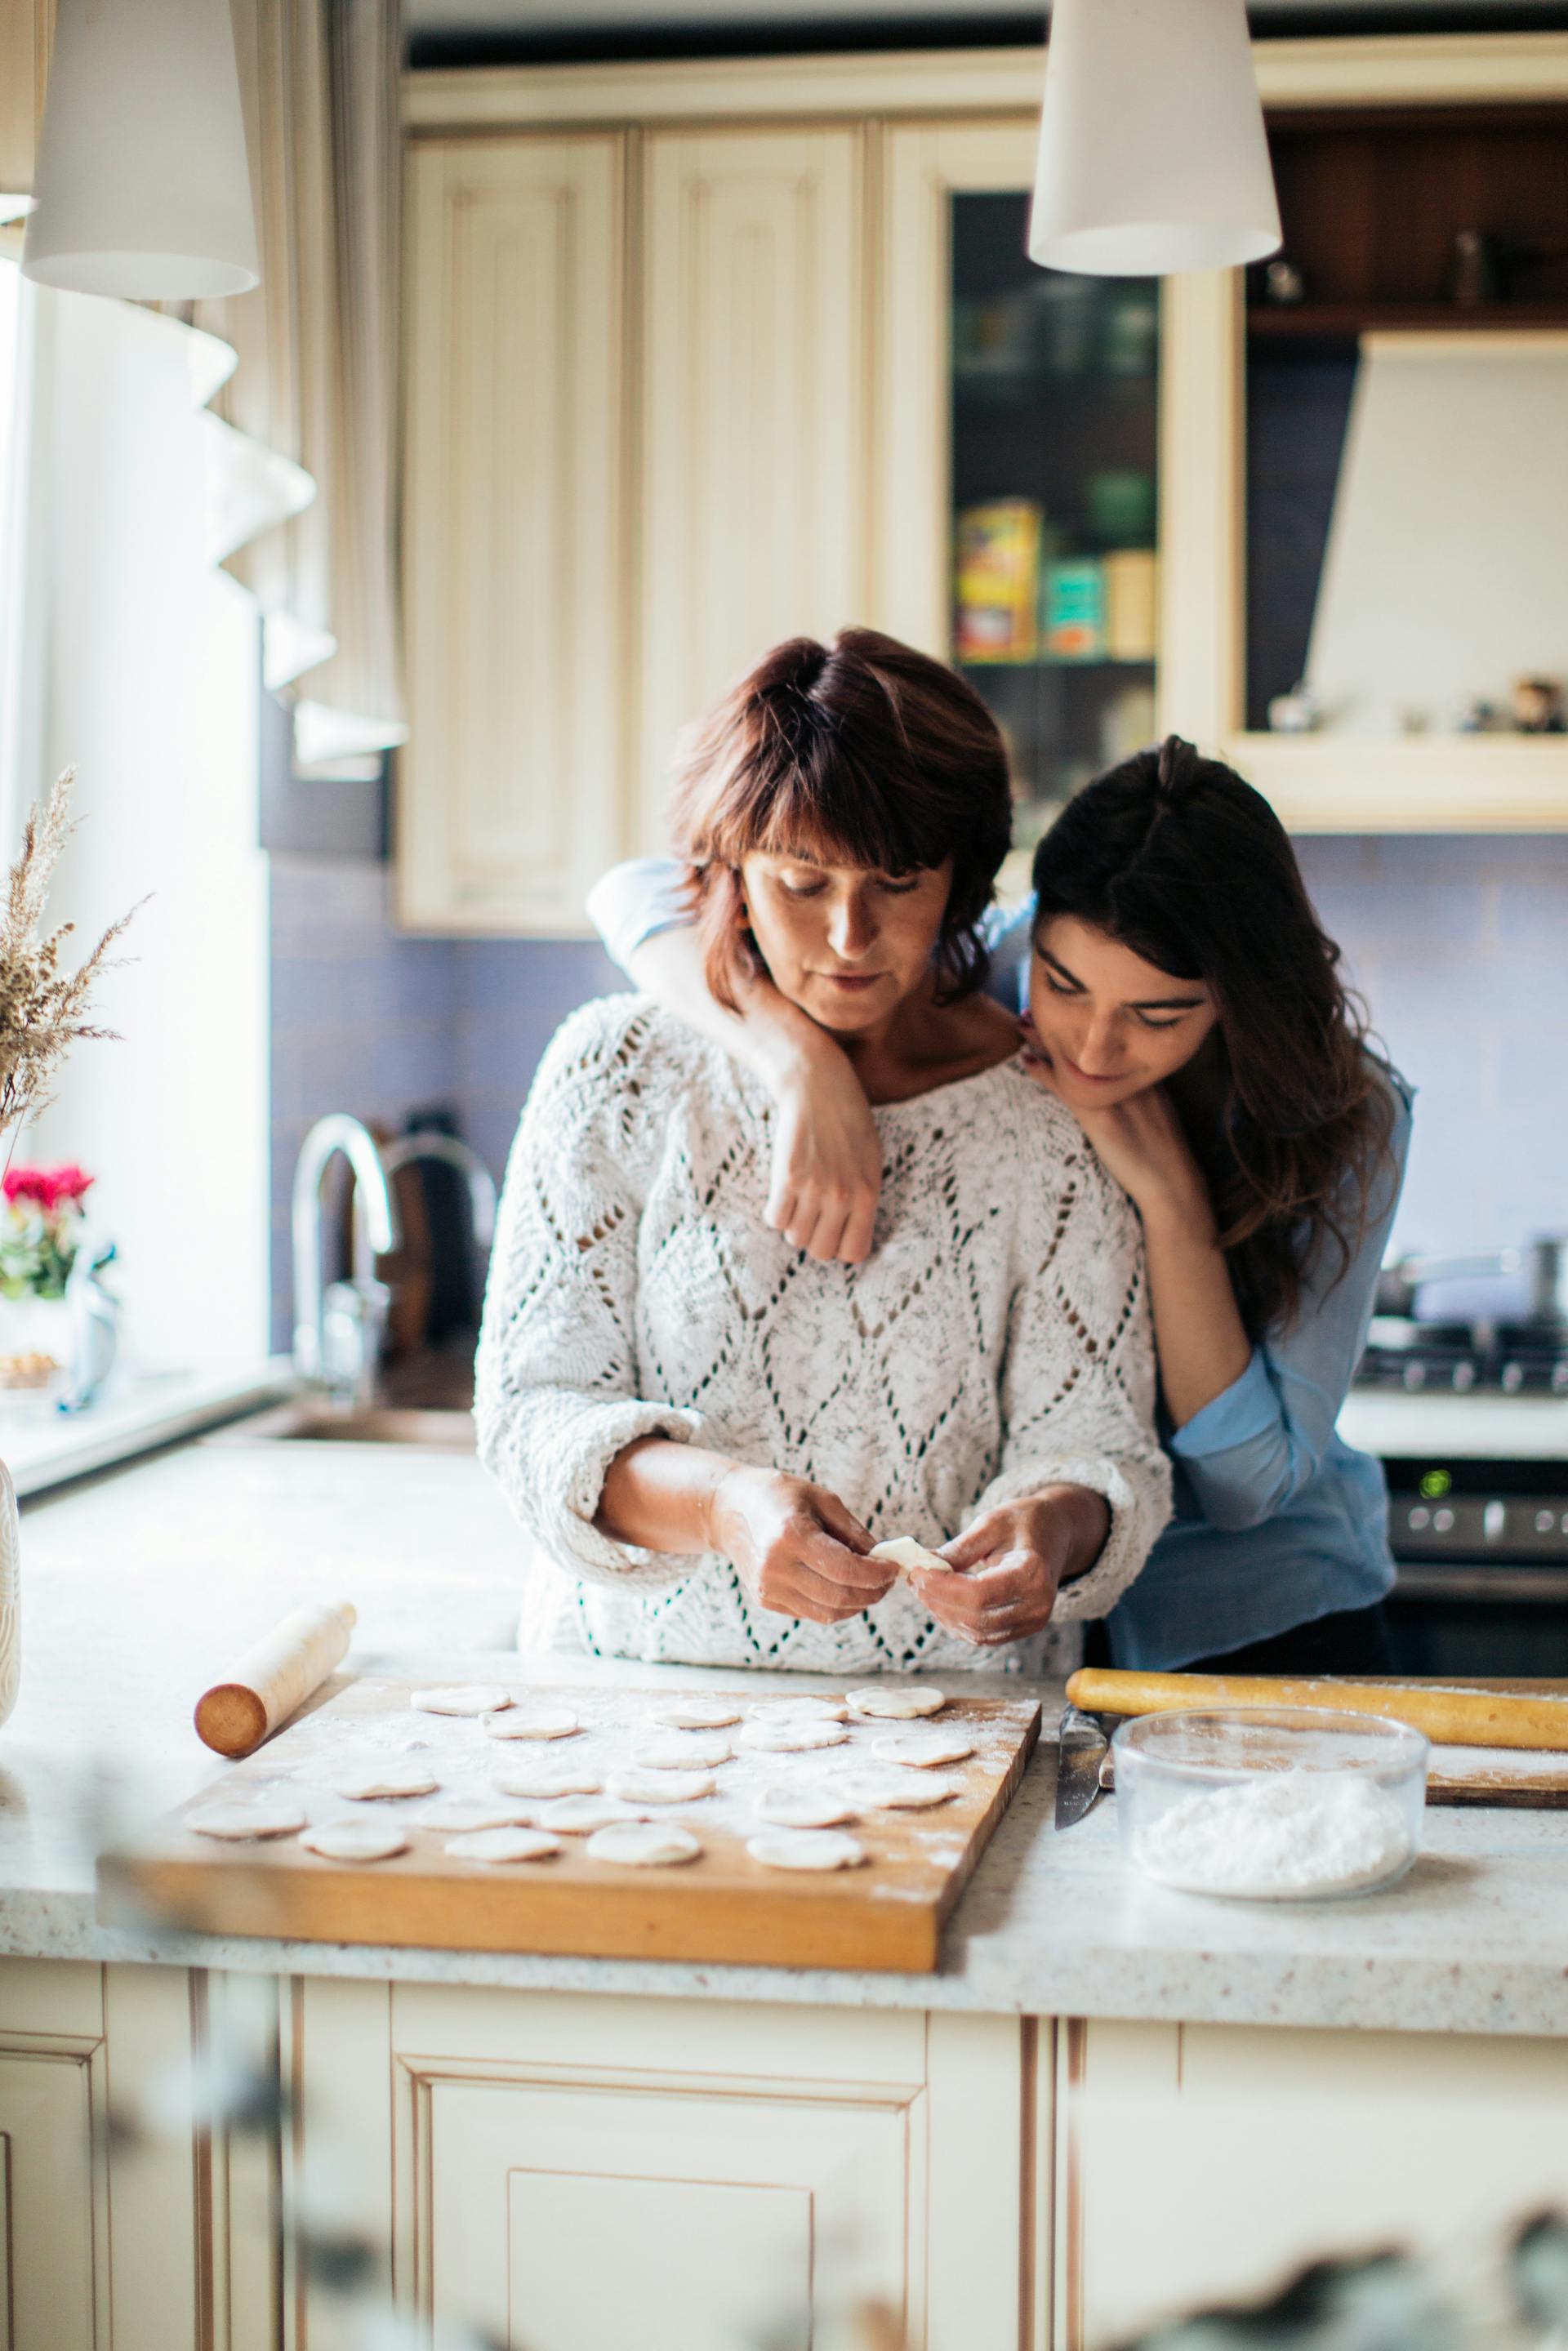 A mother and daughter in the kitchen | Source: Pexels